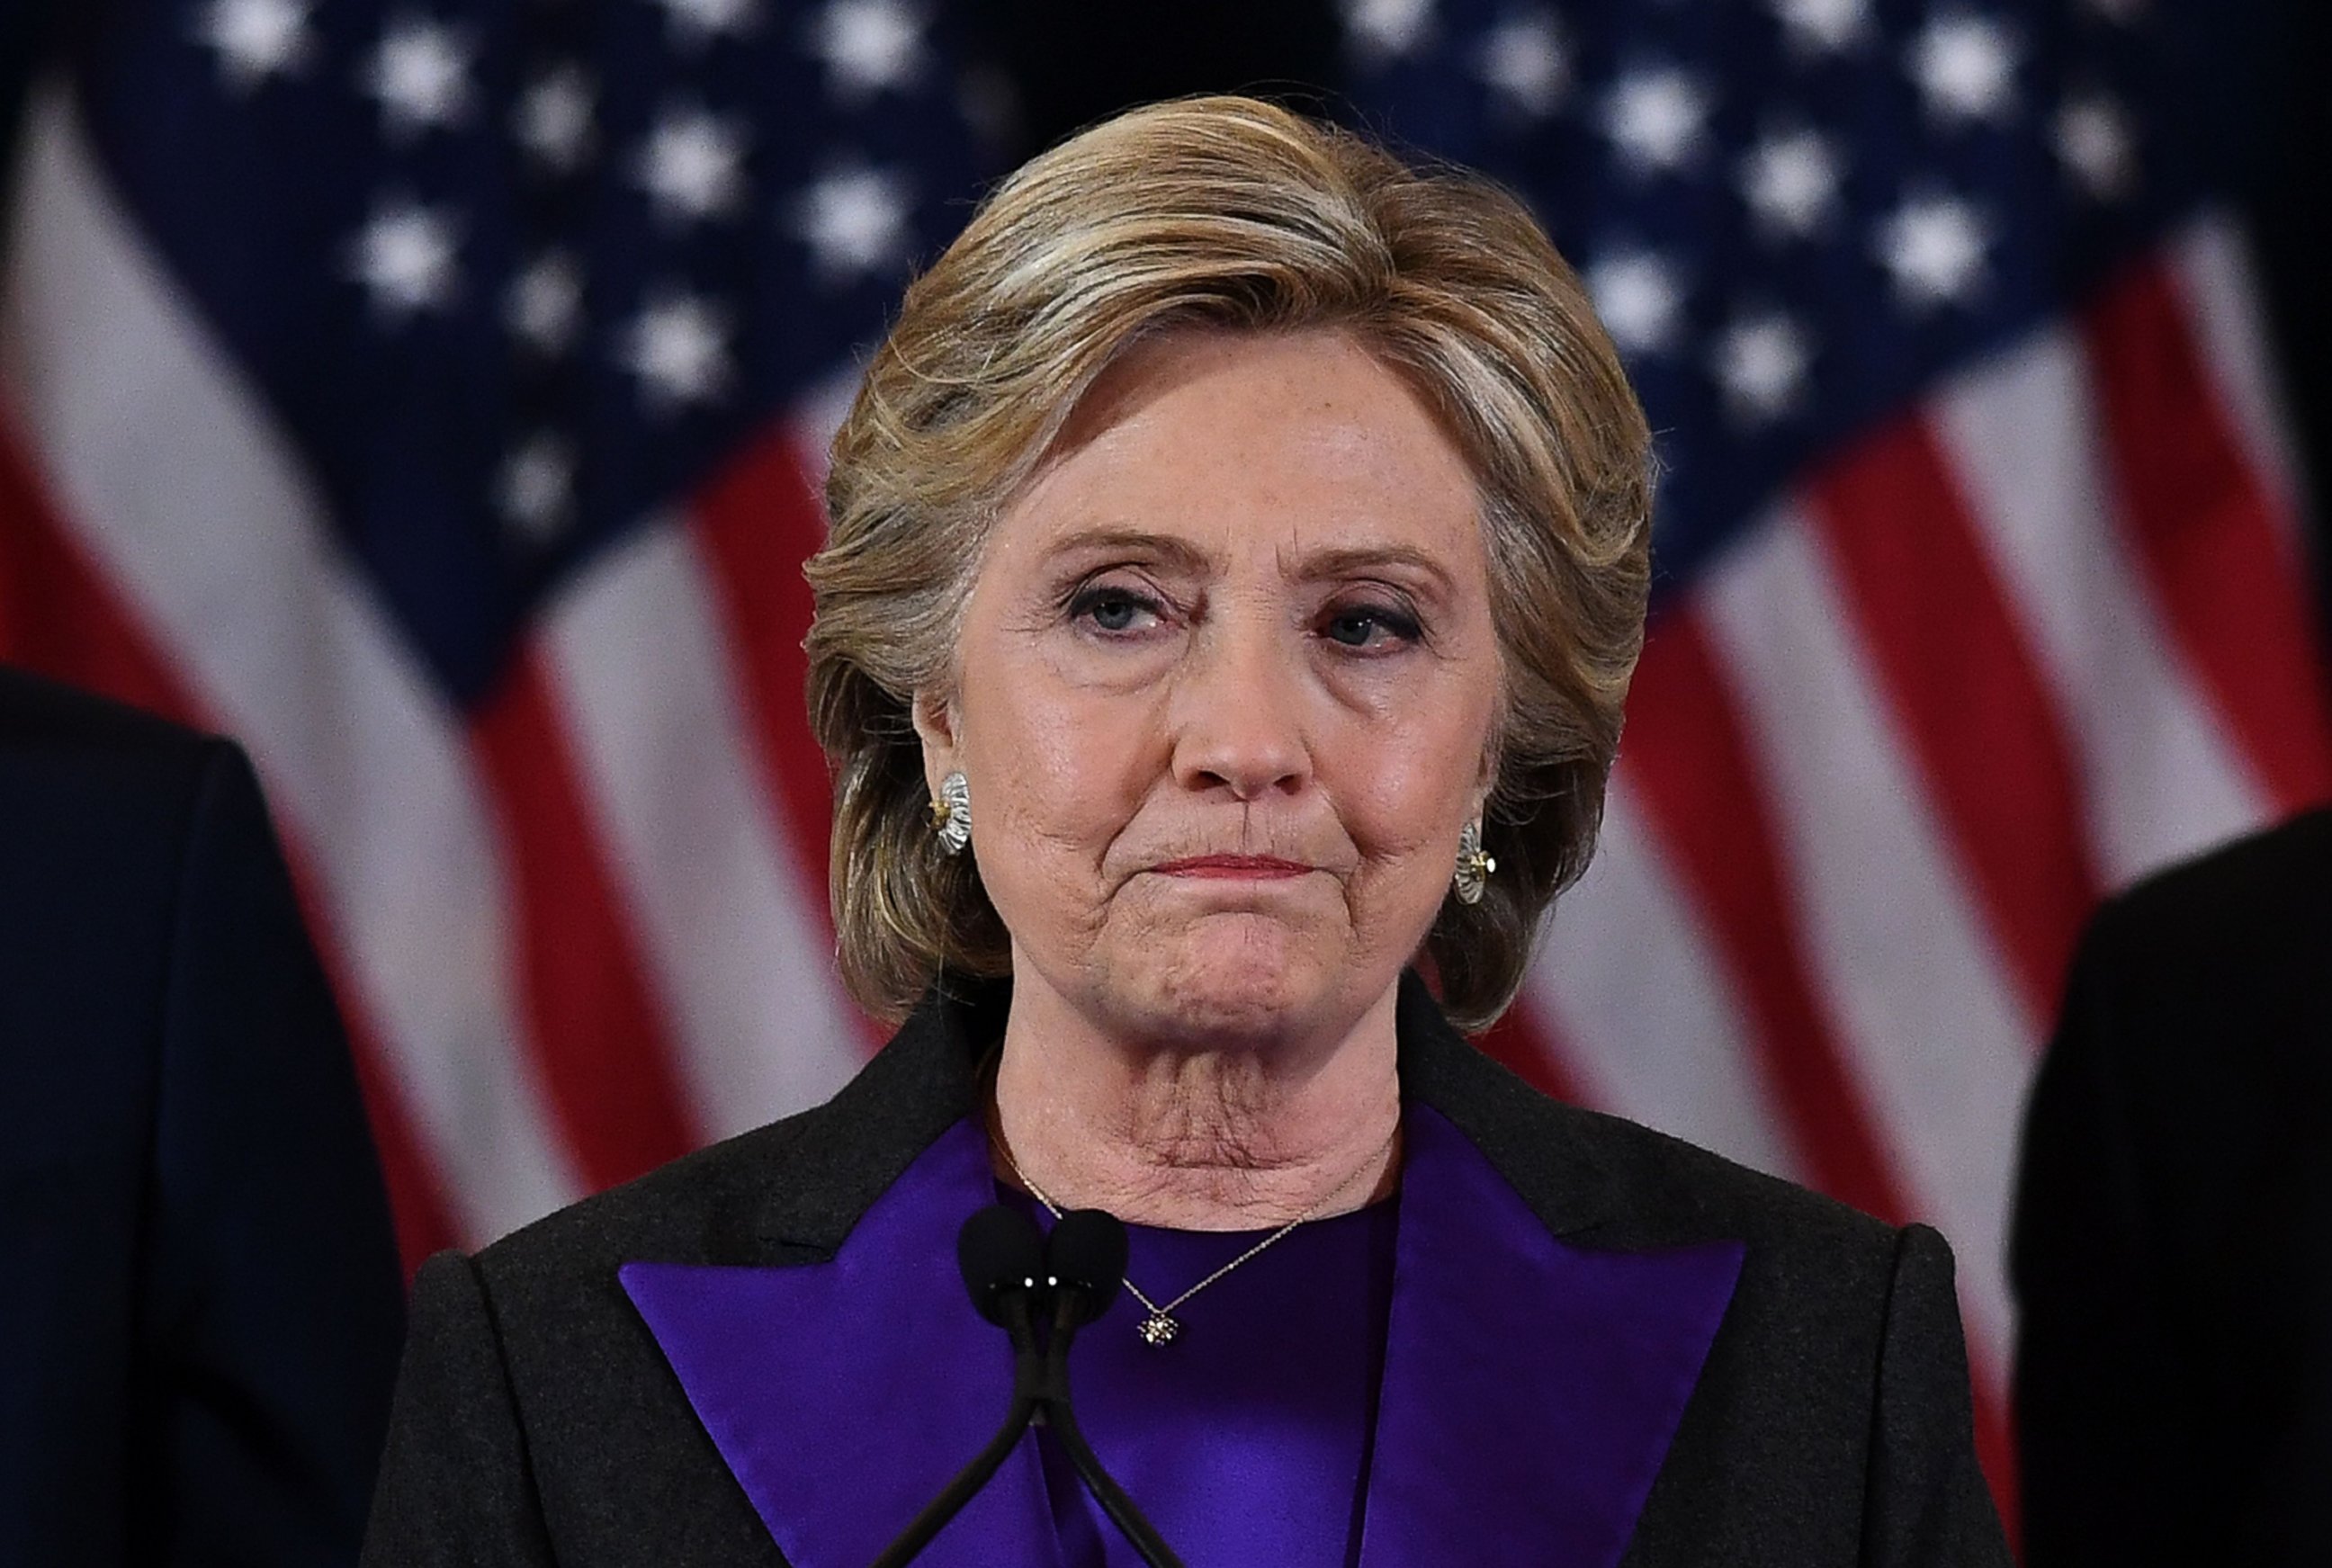 PHOTO: Democratic presidential candidate Hillary Clinton makes a concession speech after being defeated by Republican president-elect Donald Trump in New York on Nove. 9, 2016.